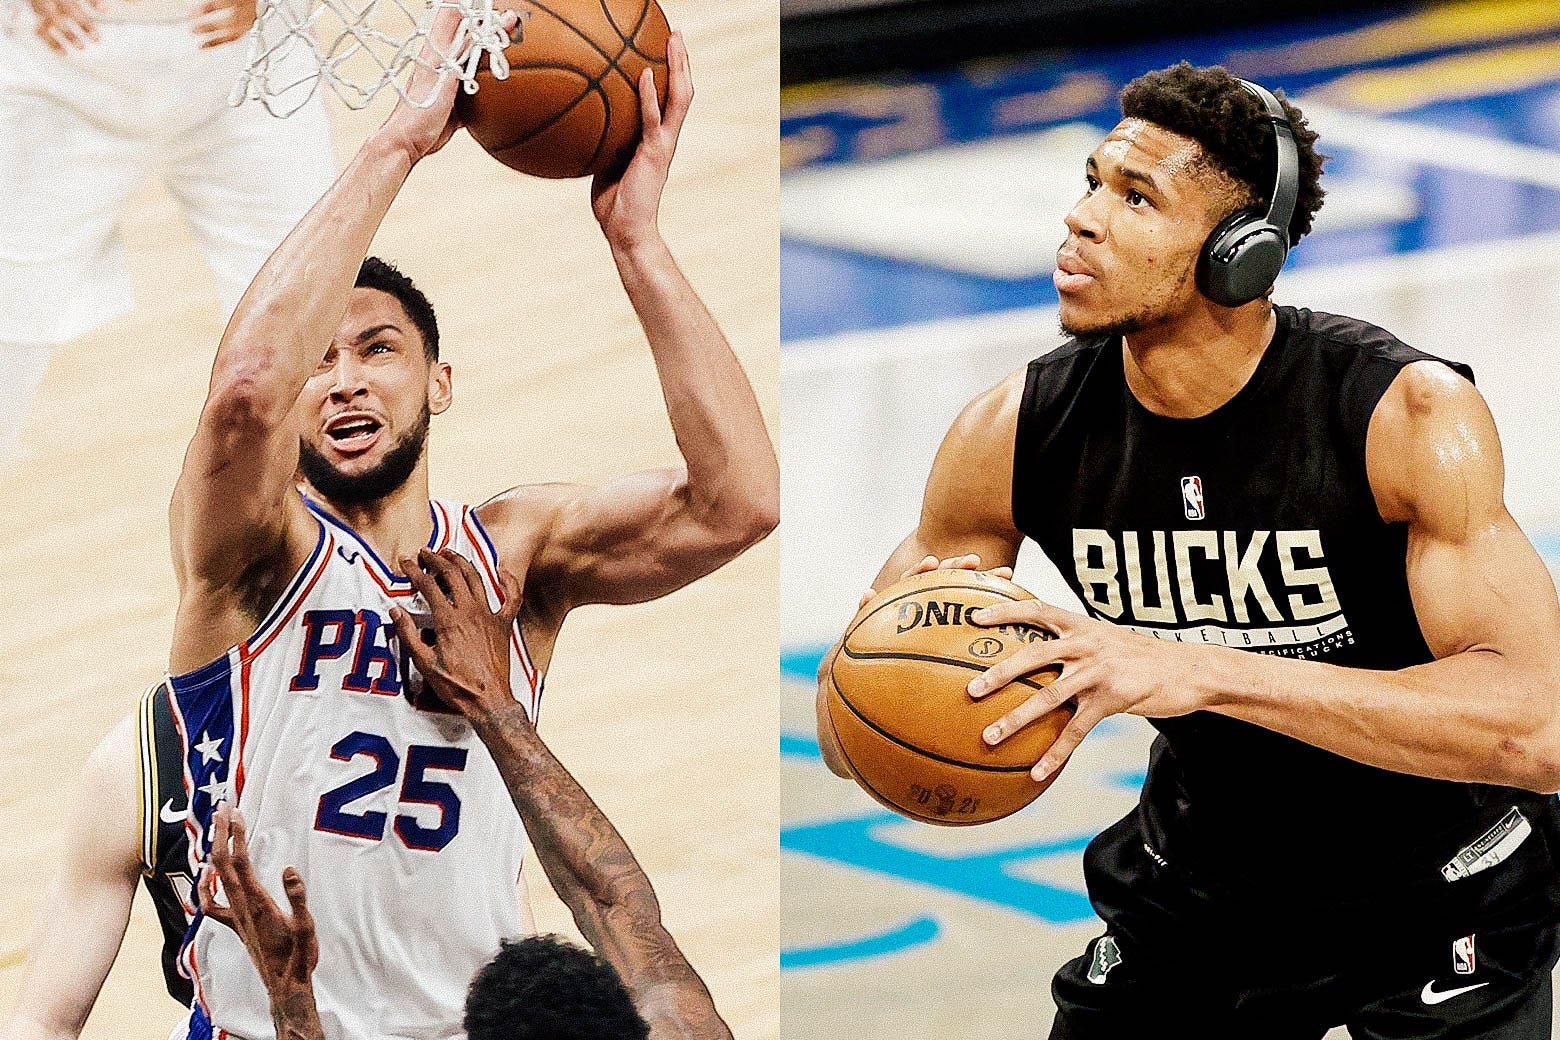 Left, Ben Simmons grimaces while driving. Right, Giannis Antetokounmpo practices free throws with headphones on.